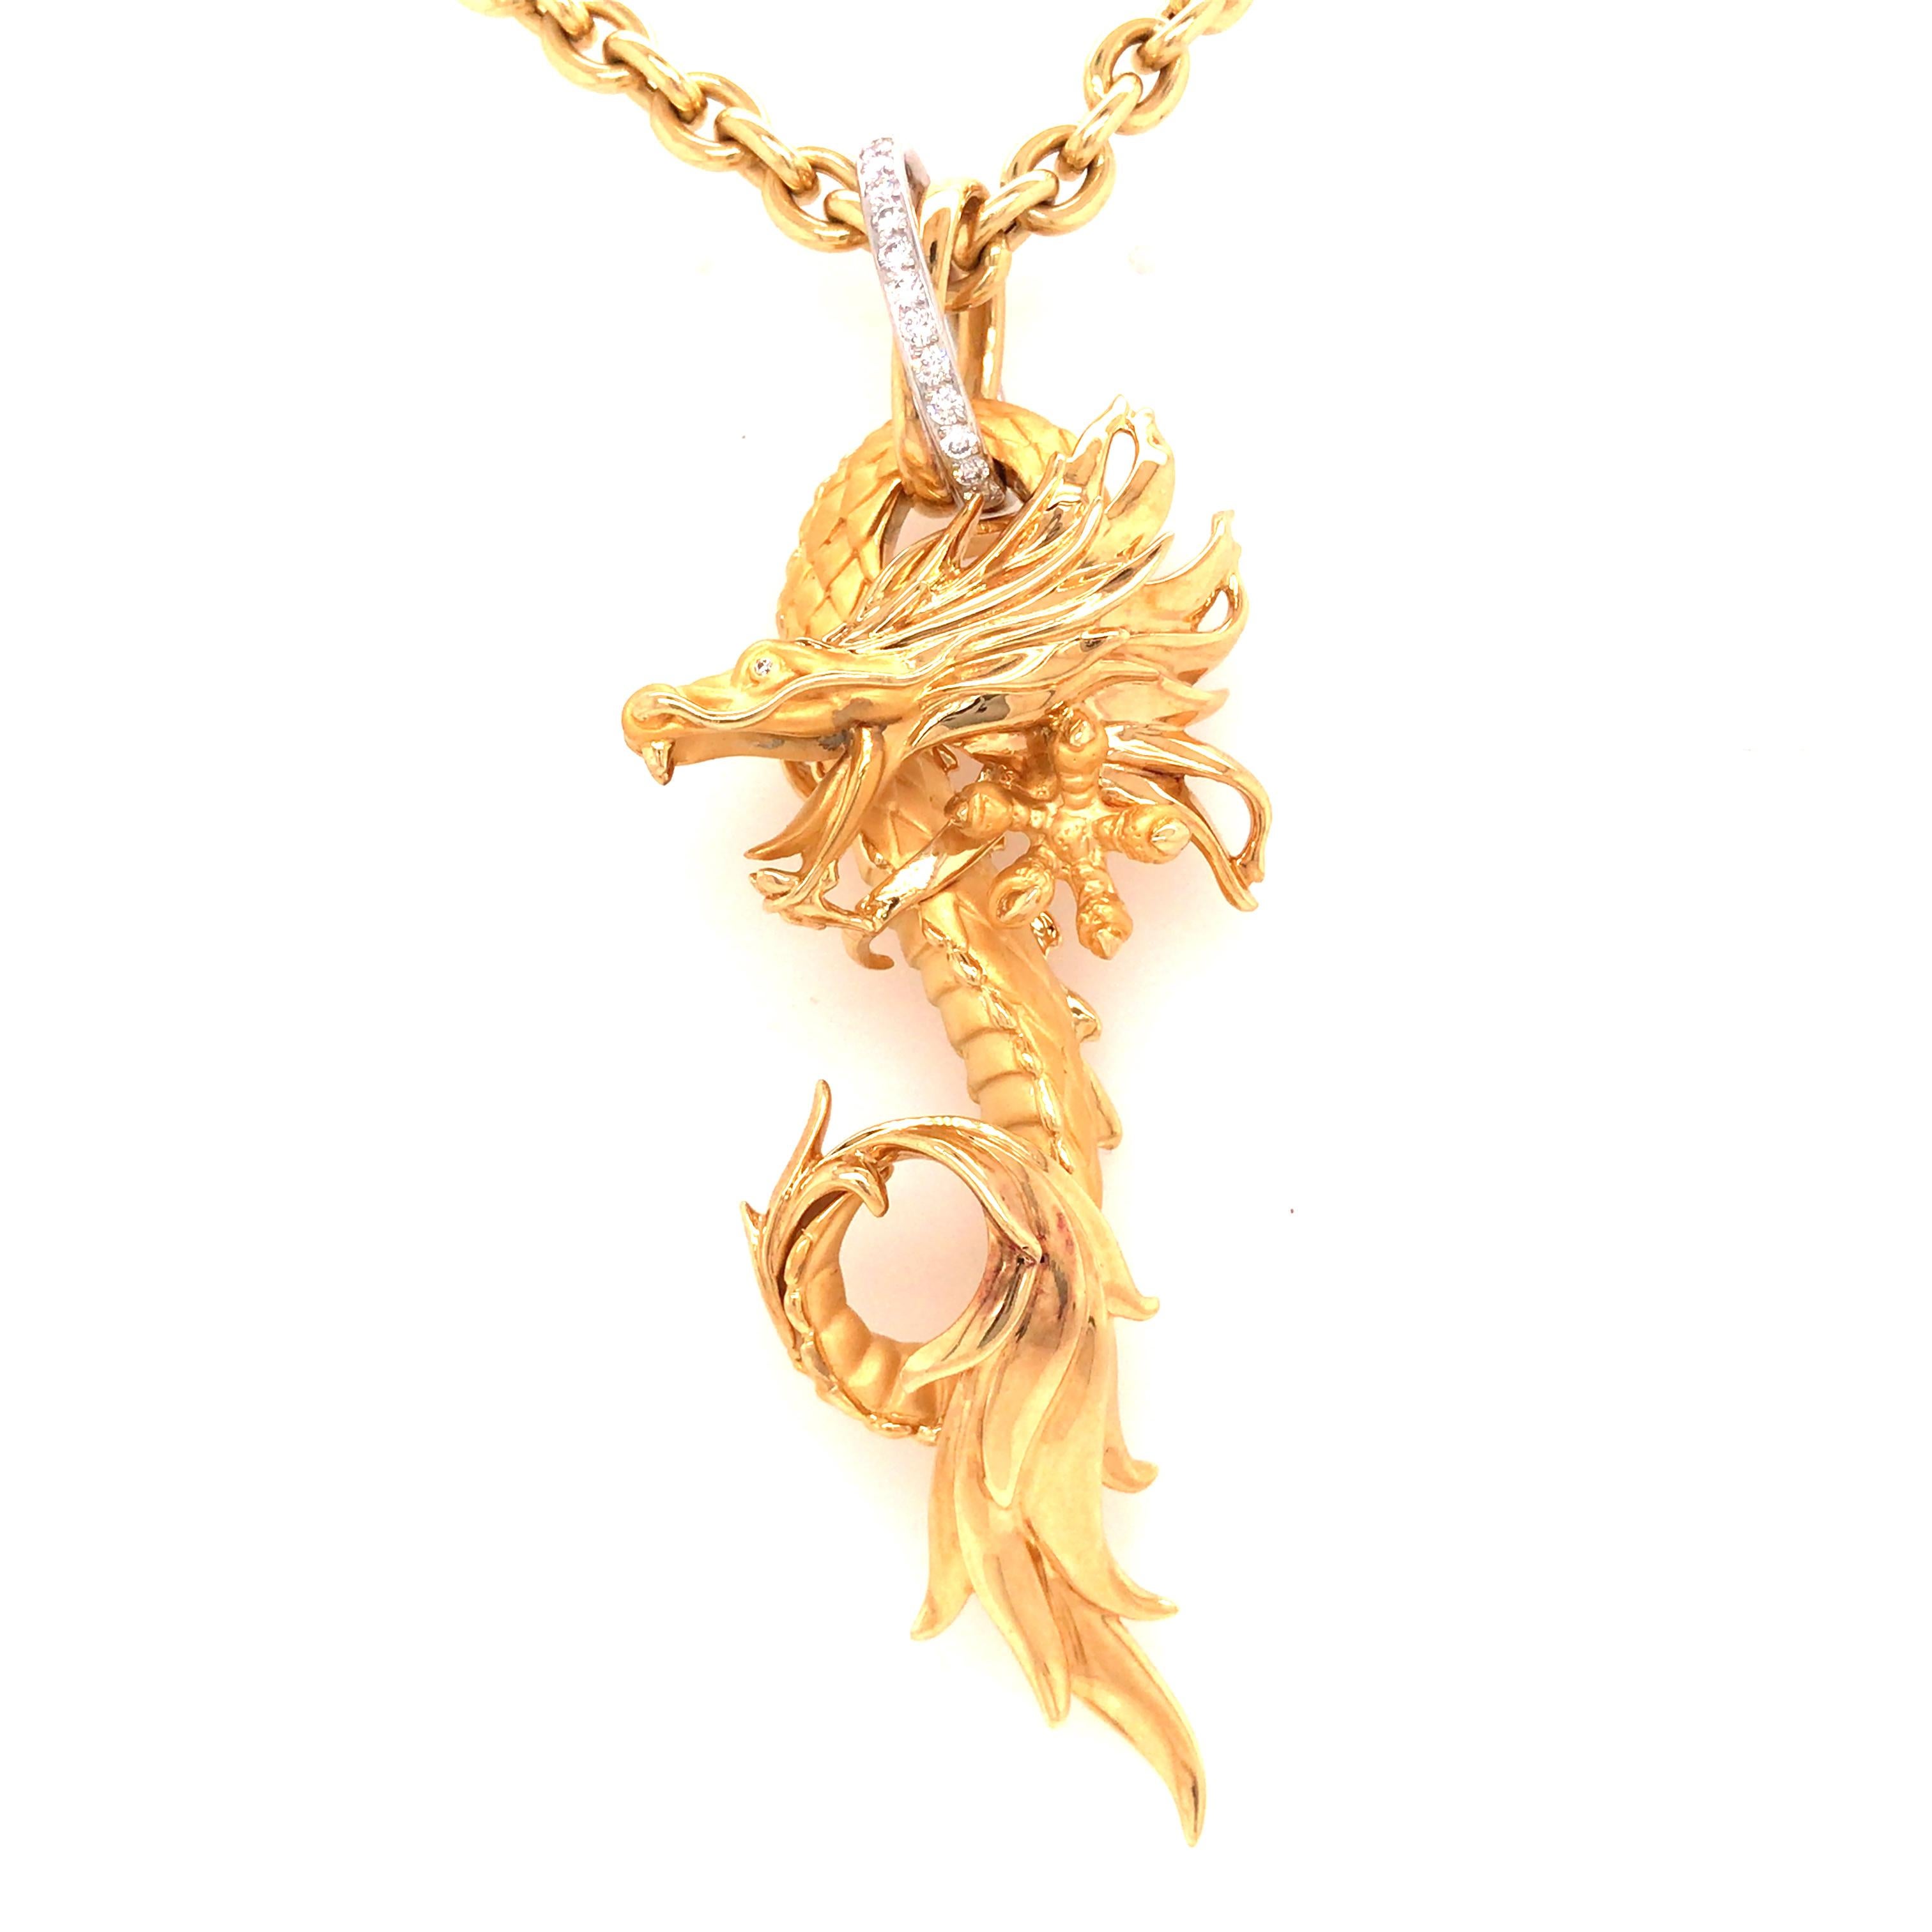 Carrera Y Carrera Dragon Pendant Necklace in 18K Two-Tone Gold.  Round Brilliant Cut Diamonds weighing 0.45 carat total weight, G-H in color and VS in clarity are expertly set in the White Gold bale. The Dragon measures 3 1/2 inch in length and 1